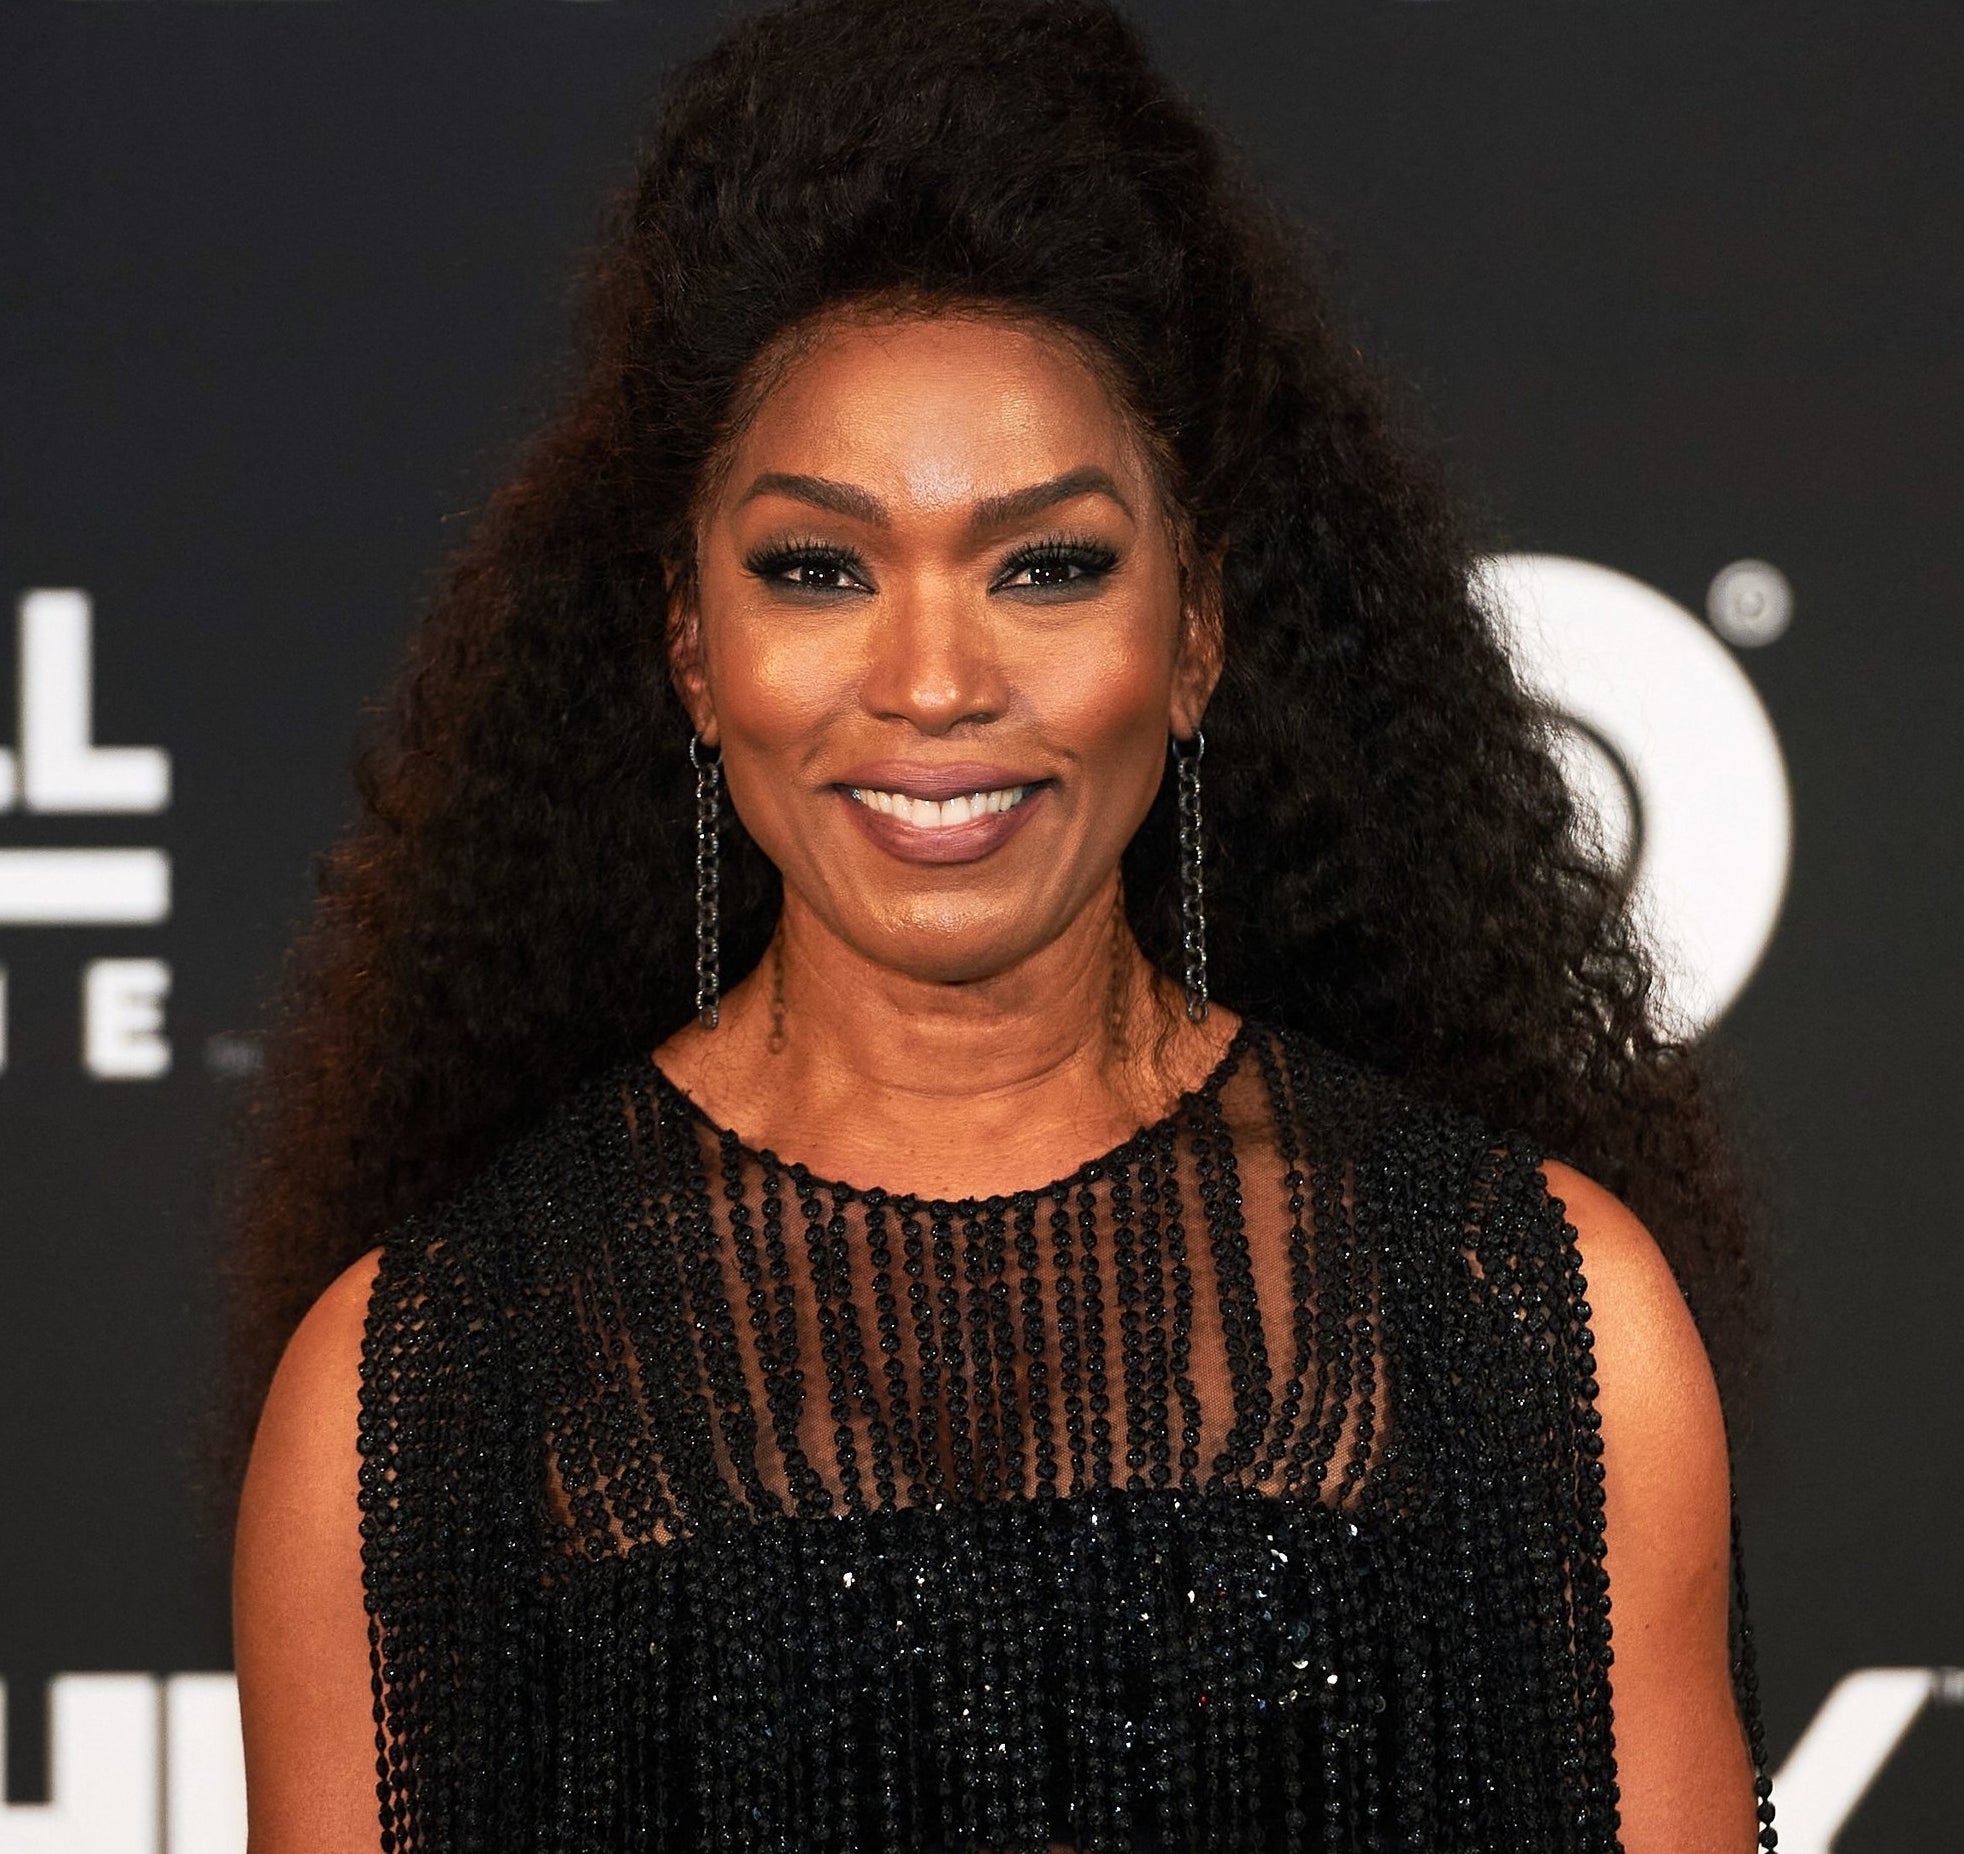 Angela Bassett poses in the press room during the Rock and Roll Hall of Fame Induction Ceremony in Cleveland, Ohio on October 30, 2021